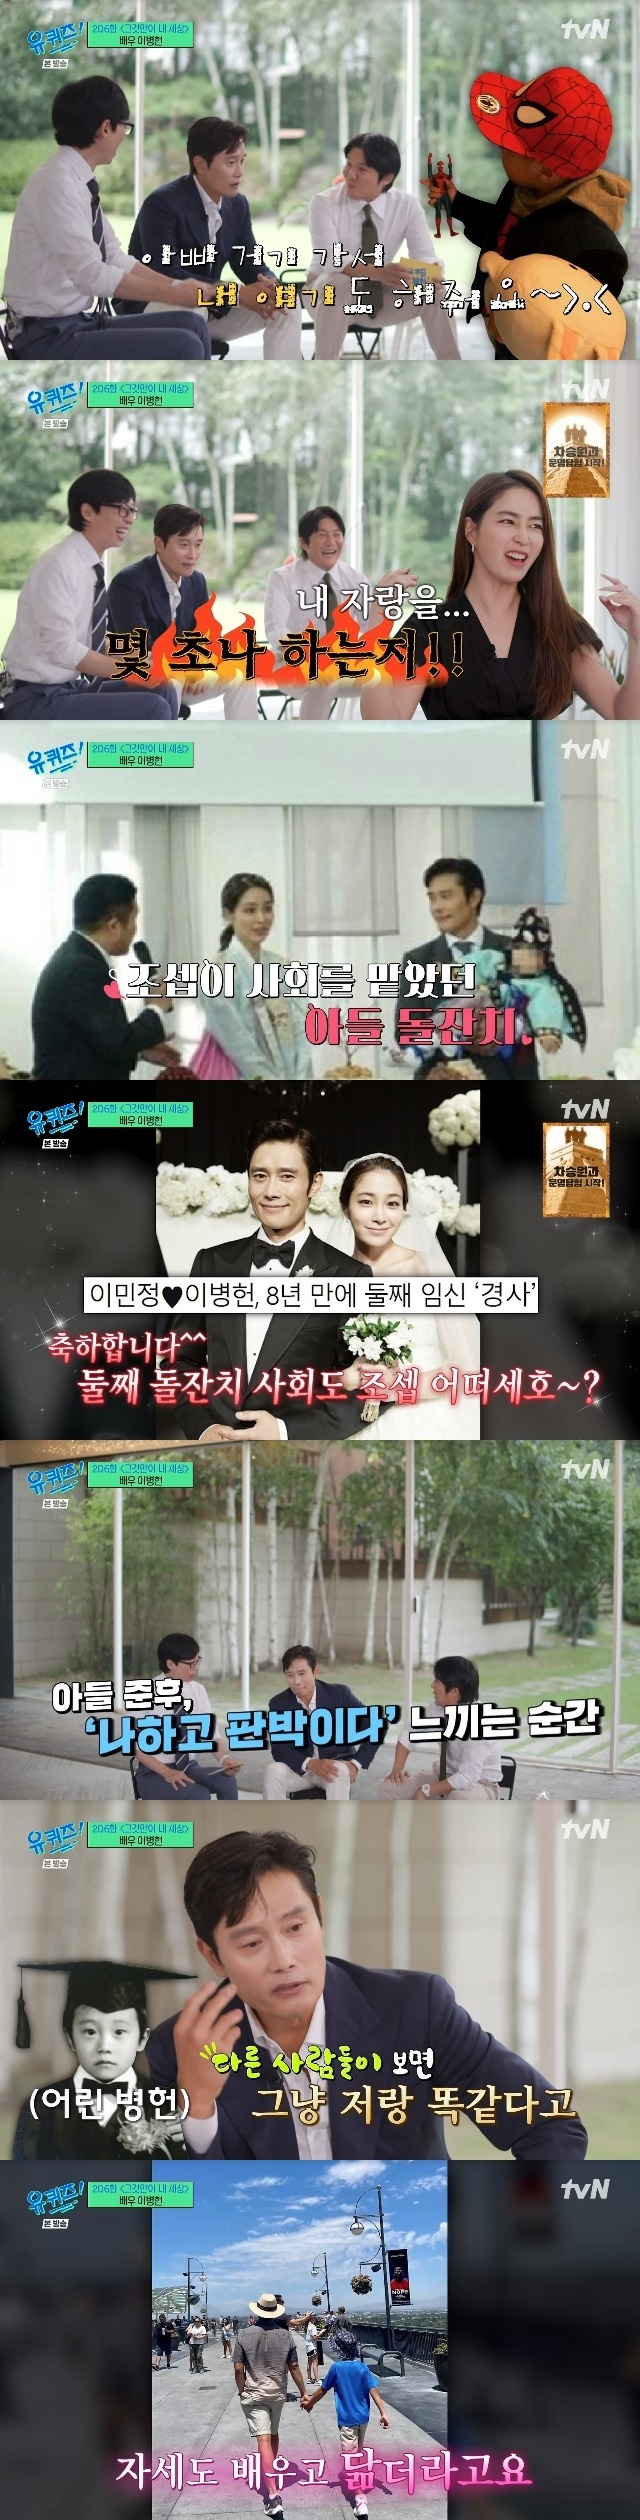 Actor Lee Byung-hun revealed the aspect of a loving father and husband.Actor Lee Byung-hun appeared as a guest in the 206th episode of Only Thats My World, a tvN entertainment show You Quiz on the Block (hereinafter referred to as You Quiz on the Block) aired on August 9.Lee Byung-hun said, I just washed up this morning and rushed out and told my family to go out, he said.Im going to be on You Quiz on the Block today, he said. I was so excited to promote the movie.Son said, Father, go there and tell me about me. I asked him to tell me about his best friends. As soon as Lee Byung-hun gave time, he immediately called the names of the friends of son Jun-ho one by one, and expressed his desire as a father, I hope you will be a good friend with Jun-ho in the future.When asked if he was memorizing his friends name, he replied, I often come to play.Lee Byung-hun also mentioned Wife Lee Min-jung, who said he had saved Wife Lee Min-jung on his cell phone as MJ.He said, How many seconds do you have on your brag? He said he would give you another time. At that time, I try to speak slowly. I see how many seconds I do.Jo Se-ho told the story of Lee Byung-hun, whom Jasin had experienced. At the request of an acquaintance, he hosted Jun-hos first birthday party, which is now eight years old.Jo Se-ho said, He gave me a really expensive luxury bag as a gift, and Lee Byung-hun said, I was sorry for the first time and I was awkward and thankful. Thank you for borrowing this place.Lee Byung-hun later confessed that he was still an actor who wants to be SinB and wondered what to talk about in You Quiz on the Block. However, he said, Its unintentionally a meme these days.I have too many memes regardless of the SinB that I intend to keep and intend to keep.  Dong-yeop came to SNL with a lot of alcohol on the third night, and from there I became a meme star. Lee Byung-hun went on to write an unrelated book, Ive never done an acting job since I was born. Ive never dreamed of being an actor. I didnt have any of these things that I was ashamed of my friends, so I thought it would look cool to do something like this.It seemed to be wonderful to be a non-verbal subject, he said.But at the same time as I entered college, I started acting and I do not speak French well.Lee Byung-hun asked how he got to see the bond test. When I was in college for a year and was resting at home with an application for military service, my mother friend brought the KBS application.My mom said, Im playing all the time. You should do it. You should have a lot of experience.Who do you think youre going to be an actor? I went into the broadcasting station and did my first dialogue. There are about 60 people in the classroom. When I read it, the reaction of my 14 colleagues who were selected with me was  ⁇ .The producer who reviewed the program said, I am the last among 60 people. We get three months of training and cut about 10 people once a month. As a result, 40 people are selected.He said, You can be the first to be cut off, so work hard.Yoo Jae-suk wondered about Lee Byung-huns day, which was enough to hear his mother say, Do something! Lee Byung-hun bragged about the fact that he got a barista certificate.Lee Min-jung said, I always make coffee for Lee Min-jung in the morning, even if I have a hangover because I drank alcohol the day before. (Late) I learned everything, but neither Lee Min-jung nor I eat cream or foam.I only eat black, he added.When asked about the moment he felt like Jun-ho, he replied, In fact, I dont really know where he looked like. Others say he looks exactly like me. It feels good to hear that, but its amazing.Lee Byung-hun asked Jun-ho if his father was an actor, saying, I did not know the actor until I was about four years old when I was young.Everyone has a camera these days, so if you take a picture and show it, your grandmother will come out, your uncle will come out, and your friend will come out. TV is big, but everyone thinks it comes out on that screen.So when I was three years old, I thought I could instill a little bit of my presence in me, he said. When I was three years old, I sat on my lap and there was a clip of Gee, Im Joe. When I fly in the air and take off my mask, I come out.When I showed him this, he stared at it for the first time, and then he looked at me, and he said, Wow. I said, Hush, dont tell anyone, and he said yes.(Son) said, Father, but where are all these knives and clothes? and I said, I hid them in the warehouse. He asked, Does your mother know? and I said, I dont know. I lied for about two years. I really thought I was a hero.Sometimes when something is more scary than TV, I said to myself, Is it in the warehouse? Afterwards, Lee Byung-hun had the Lee Min-jung praise time, which he had foretold earlier. He said, Lee Min-jung is really good at cooking and is a really good mother and plays golf well.I think hes a really great guy, he said. Thanks to his long speech, he recorded 26 seconds. Yoo Jae-suk laughed, Wouldnt MJ like this? but Lee Byung-hun said, Wouldnt it be 20 seconds?Still, he said, Its very cool and the humor makes me laugh so much. In fact, when I first asked him what charm he had around him that he was trying to get married, he said he laughed a lot because he thought it was really funny, evoking warmth by praising Wife.Lee Min-jungs playground has become a playground for Jasins SNS. He said, Oh, no. He briefly expressed his heart, I once wrote (comment) restraint.Ill tell you what else Ill say. He also said that Lee Min-jung appeared in the past and said, Son and husband should talk on their shoulders. I am amazed as soon as my brother is over.Of course, when I talk about it for such a long time, I can not remember what Im talking about because my concentration is weak.There are many times when I can not grasp the contents of the story about what I am talking about. Lee Byung-hun told Lee Min-jung that his usual words are coffee and that he is hungry to say a lot to Lee Min-jung. I have not been home for a week if nothing happens.I dont find that frustrating. (Lee Min-jung) finds that marvelous. How can you stay without going out? Because you have a Movie at home and you can have a drink if youre bored.I watched the movie and watched the movie. 